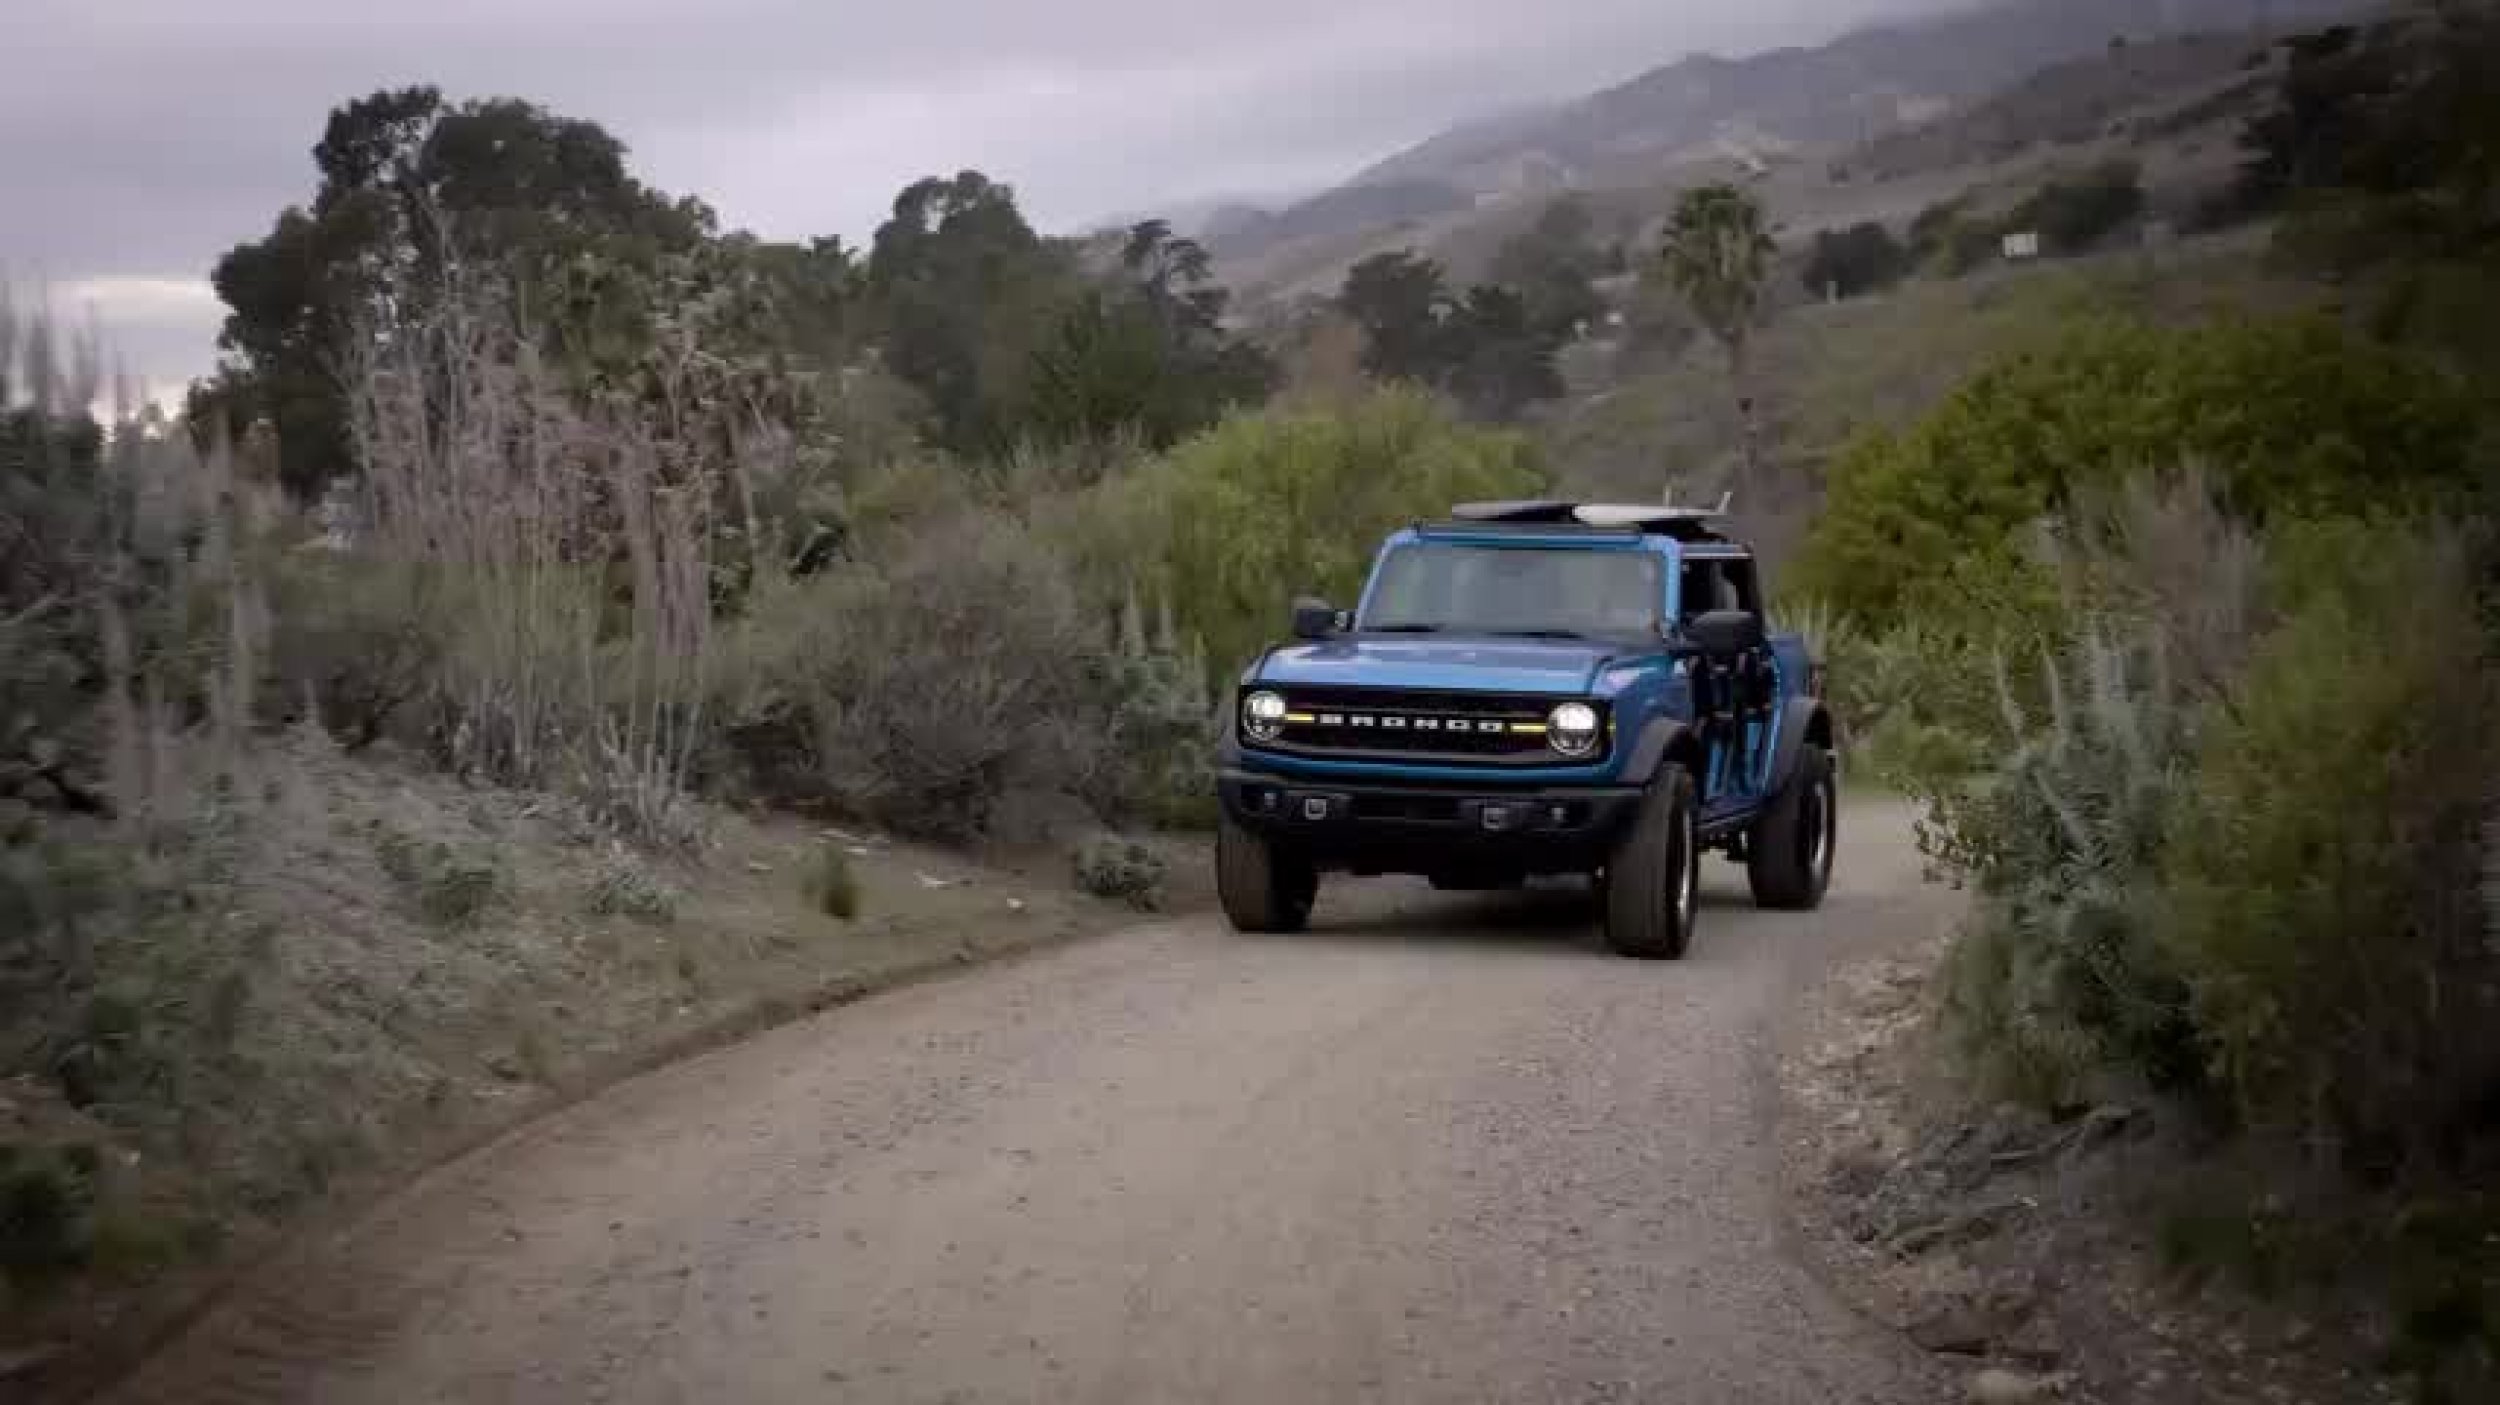 Take An Up Close Look At The Ford Bronco Riptide Concept Vehicle